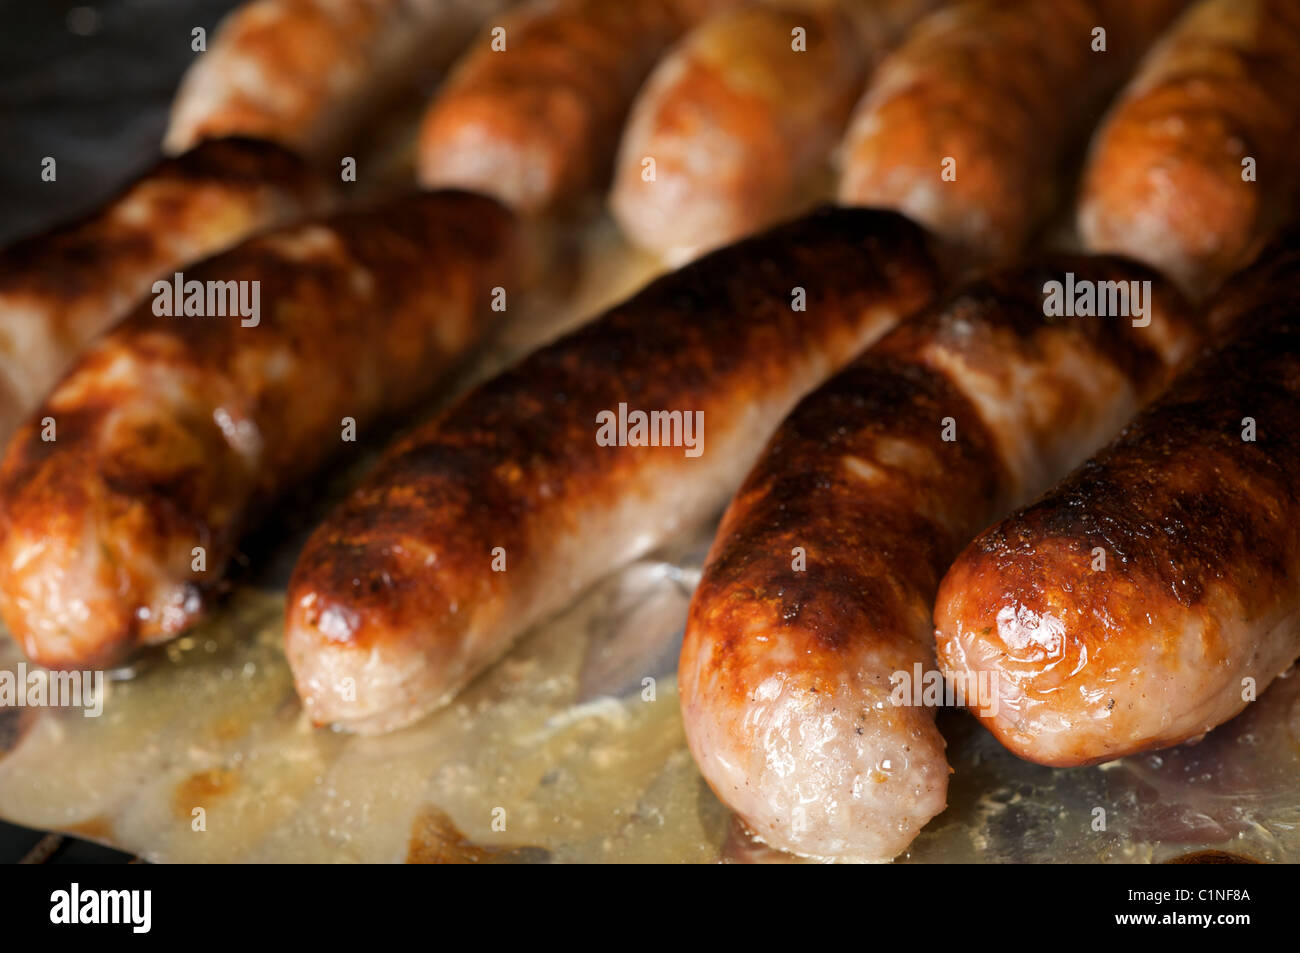 Sausages being cooked under electric grill Stock Photo